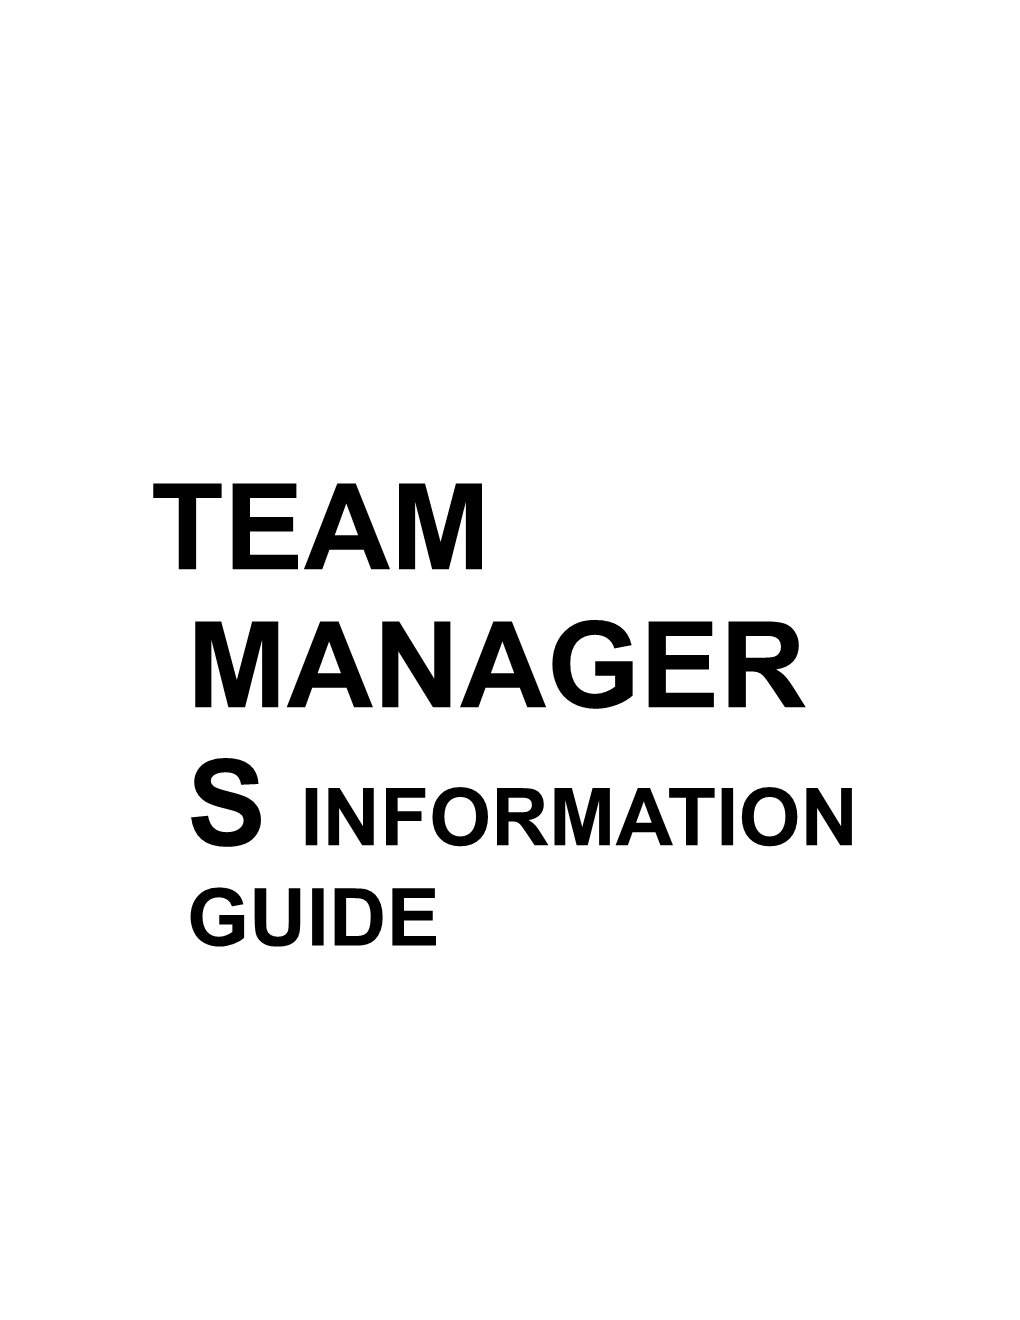 Team Managers Information Guide